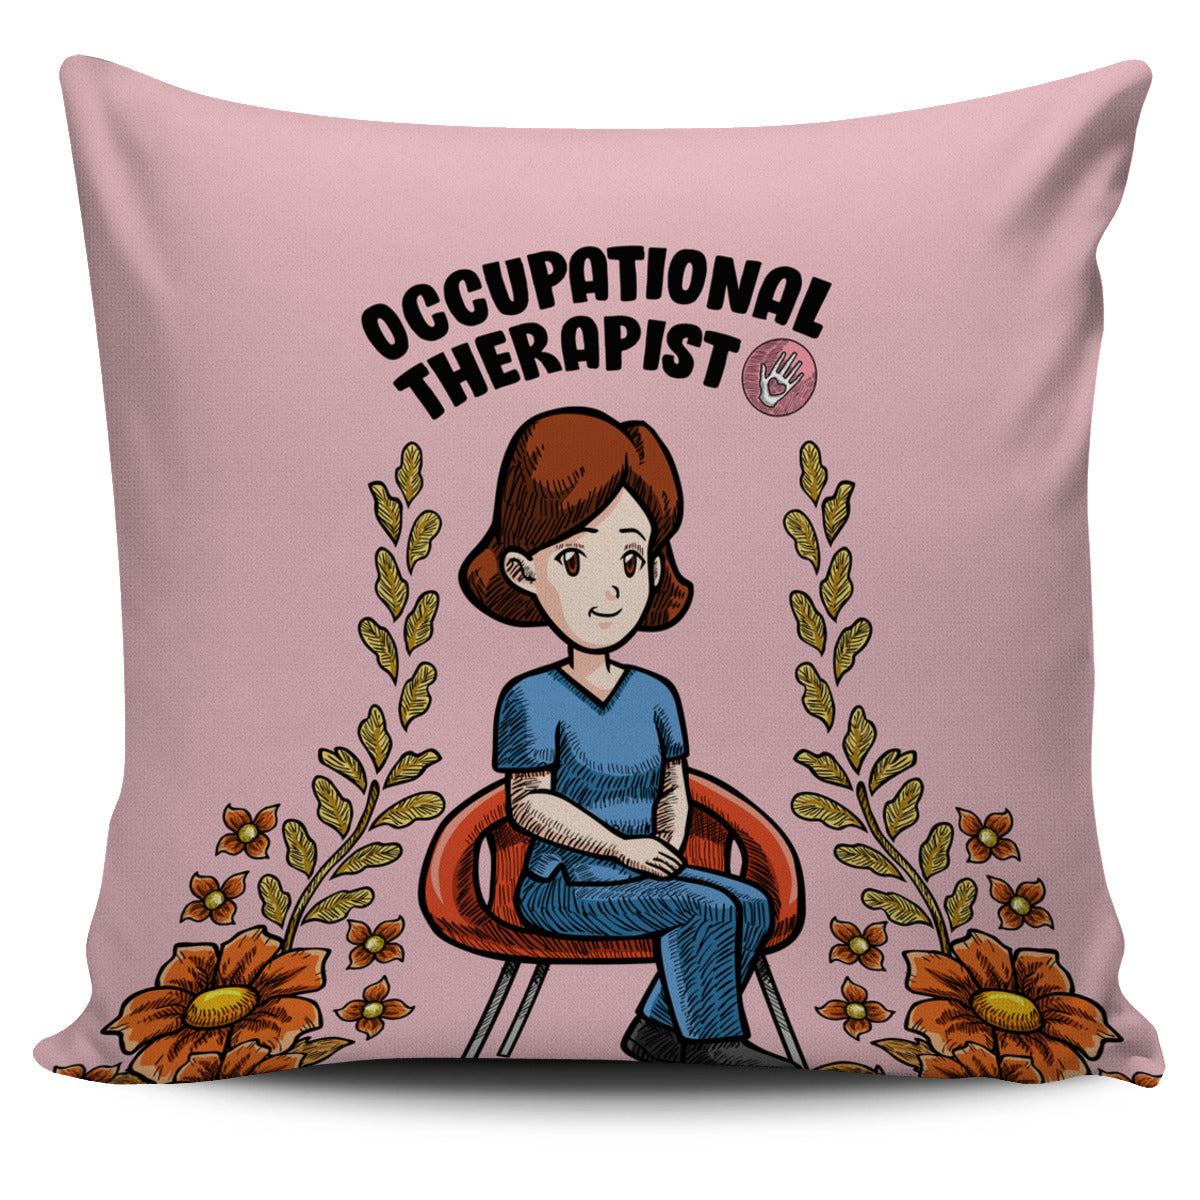 Occupational Therapist Pillow Cover